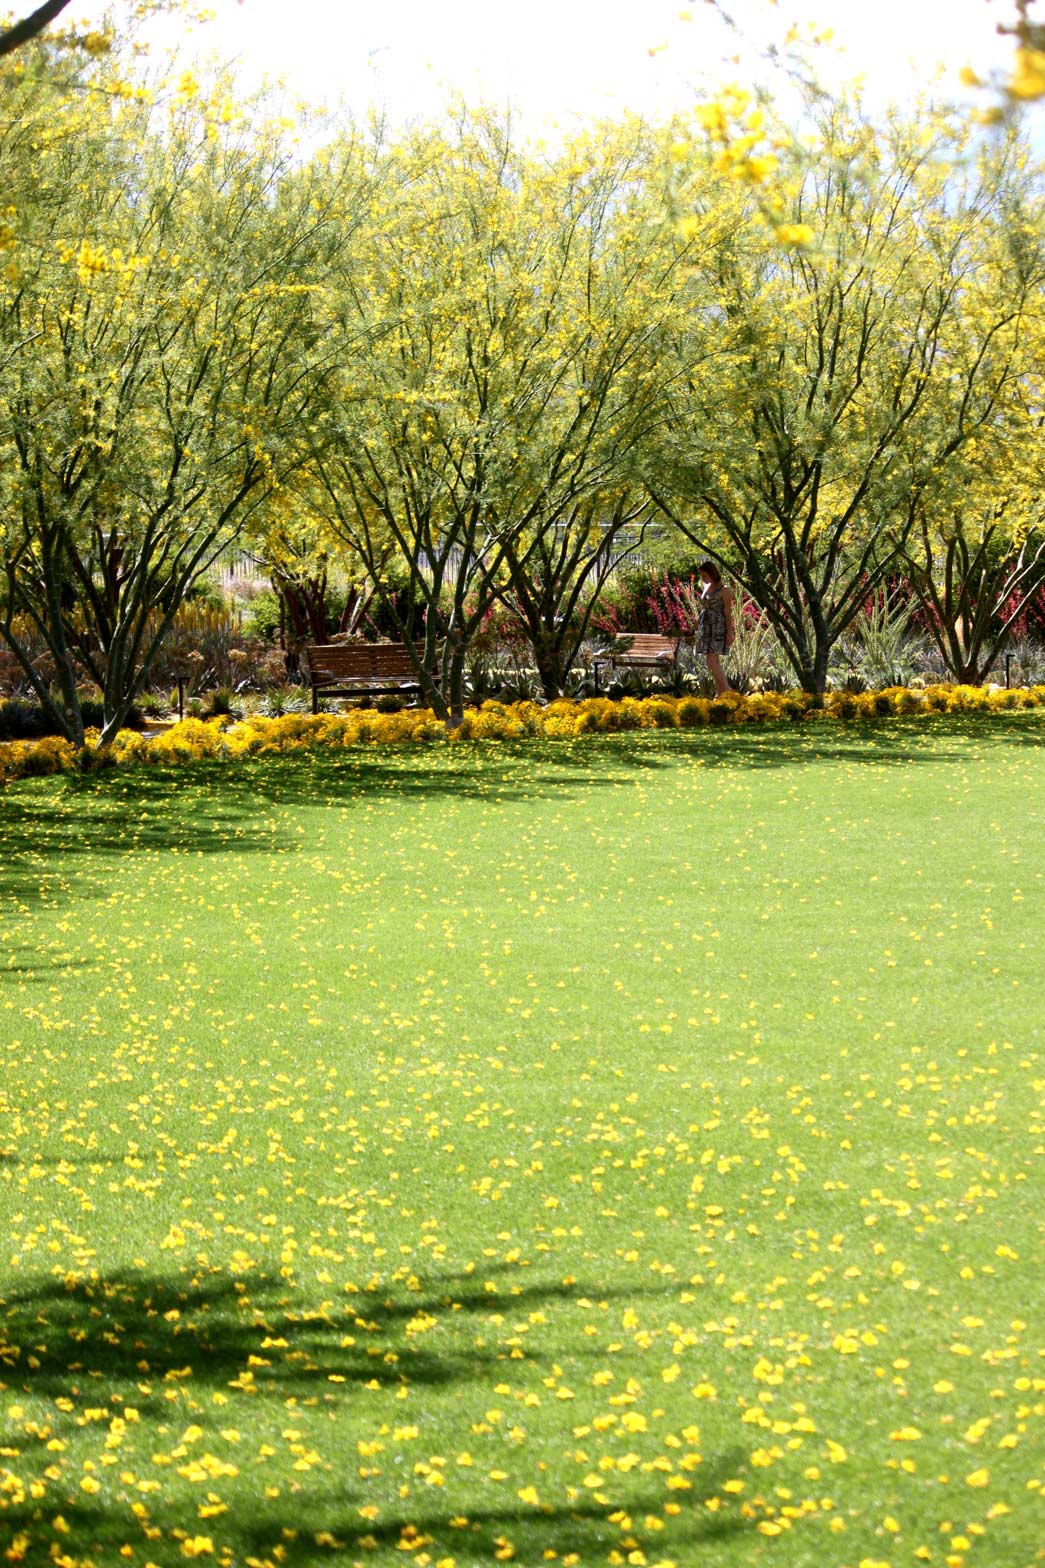 Blooming Palo Verde trees border the Great Lawn.